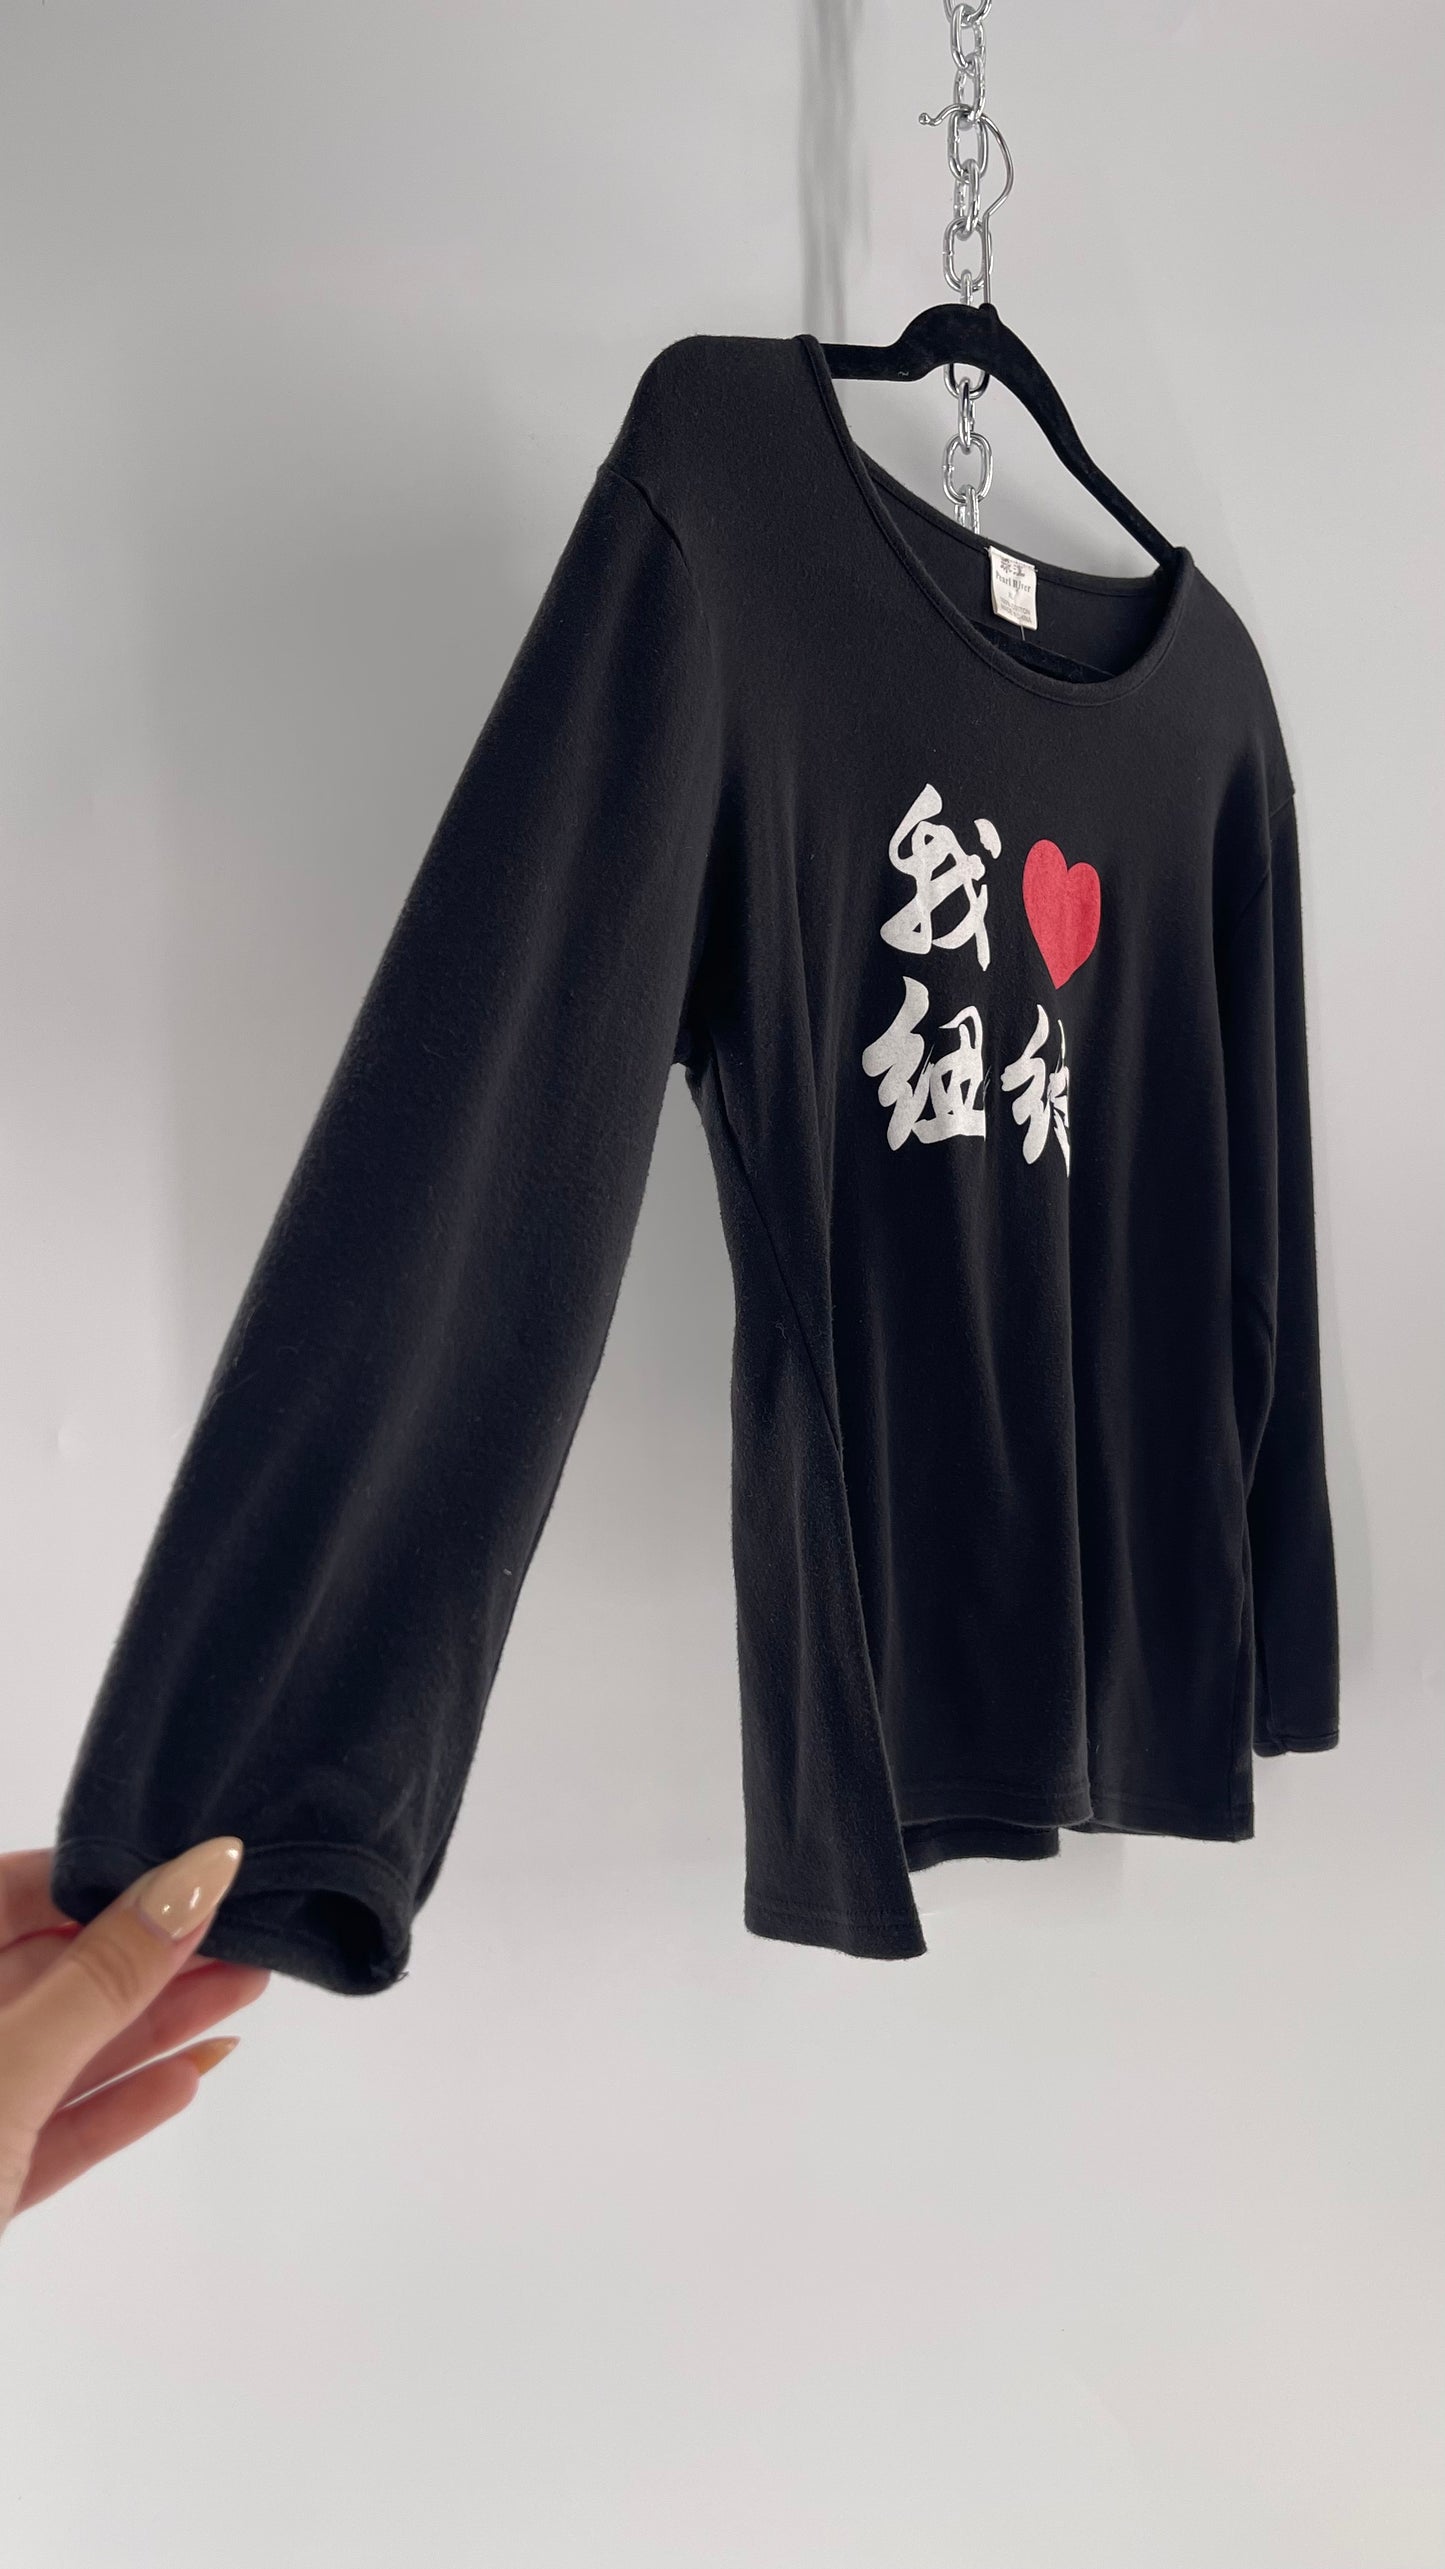 Vintage Chinese Graphic “I <3 New York” T (XL)